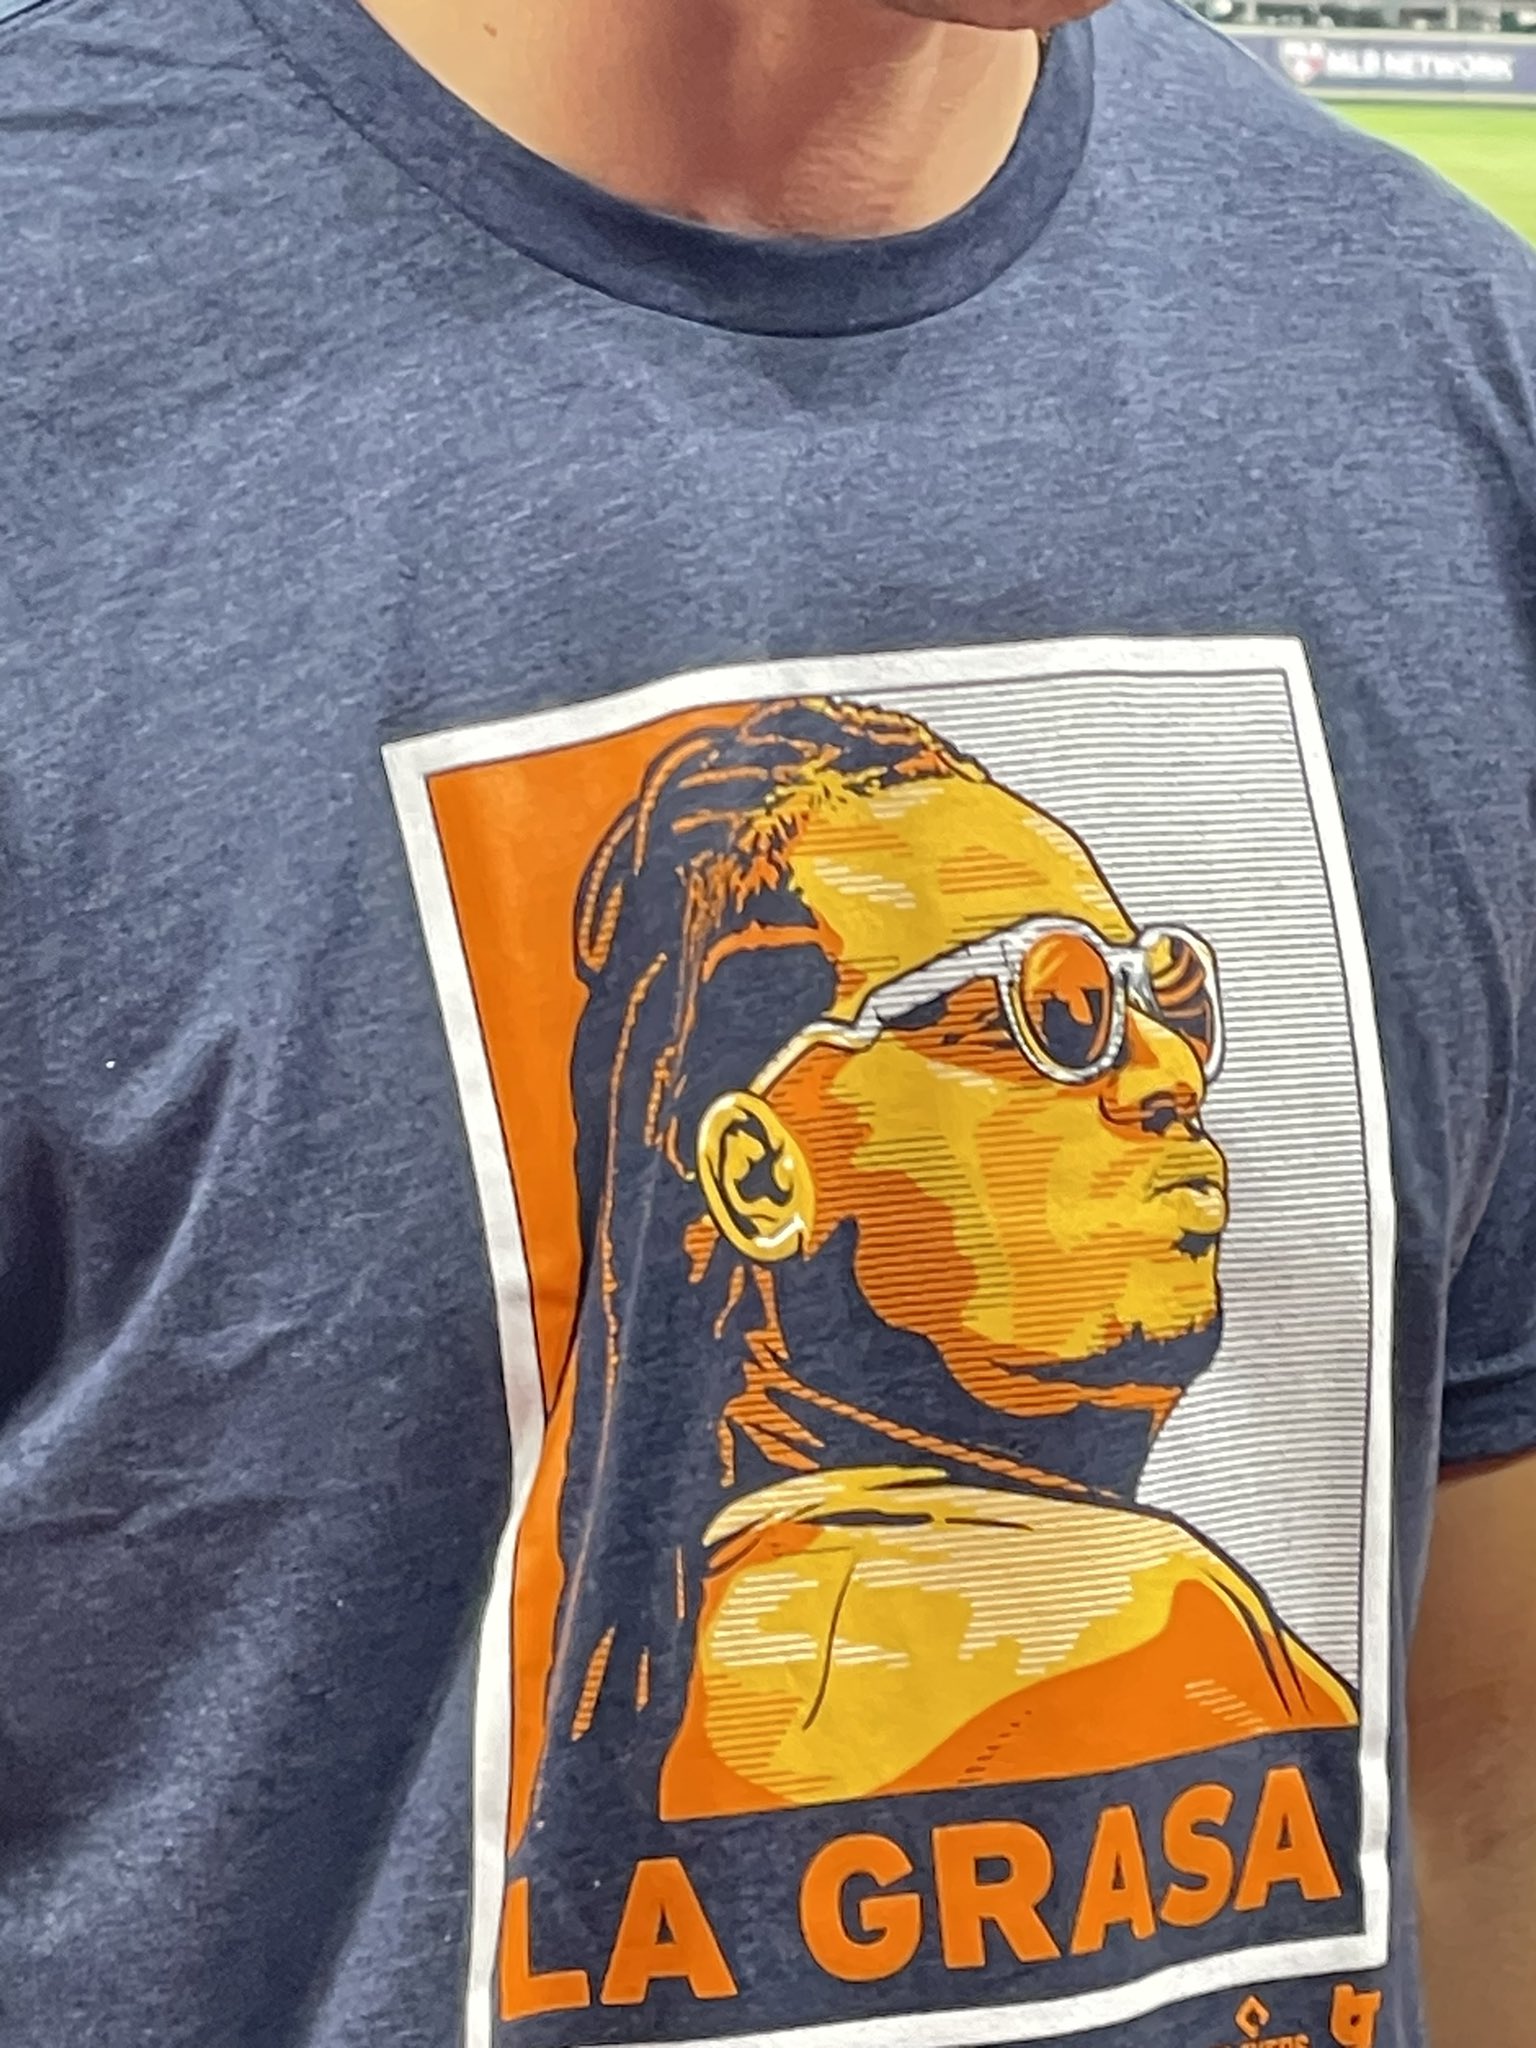 Our Esquina on X: La Grasa! Astros ace Framber Valdez has “el flow,” as  they say. So Mauricio Dubon and some teammates are wearing “La Grasa” t- shirts with Valdez's face on it. #